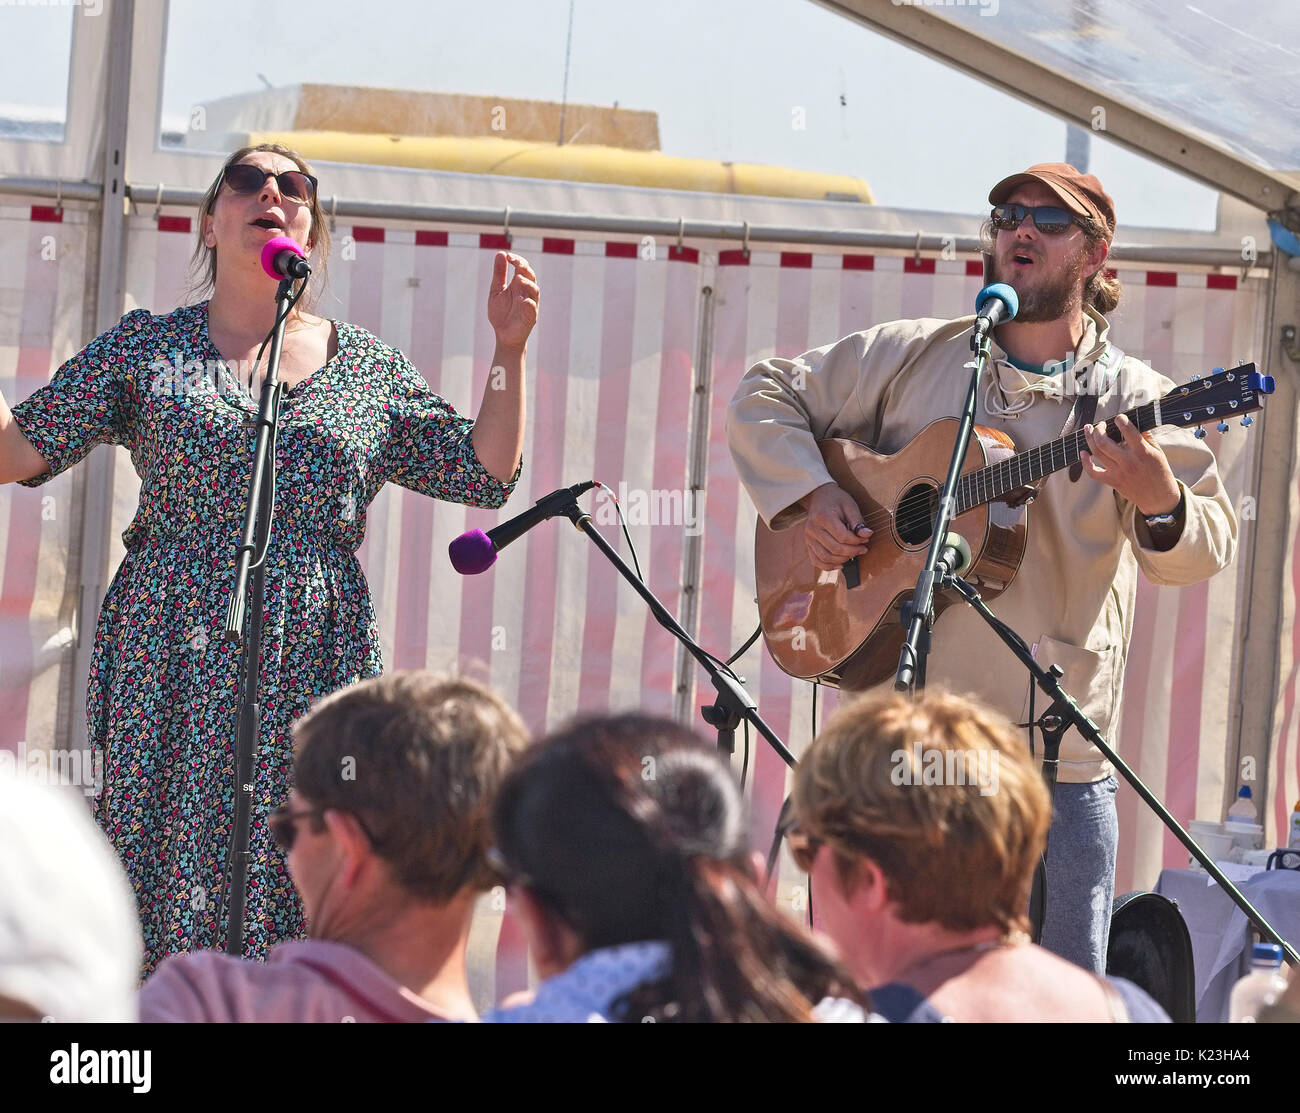 Newlyn, Cornwall, UK. 28th Aug, 2017. Pete Tuin and Anna Cornish performing at the Newlyn Fish Festival, Newlyn, Cornwall, England, UK. Credit: tony mills/Alamy Live News Stock Photo